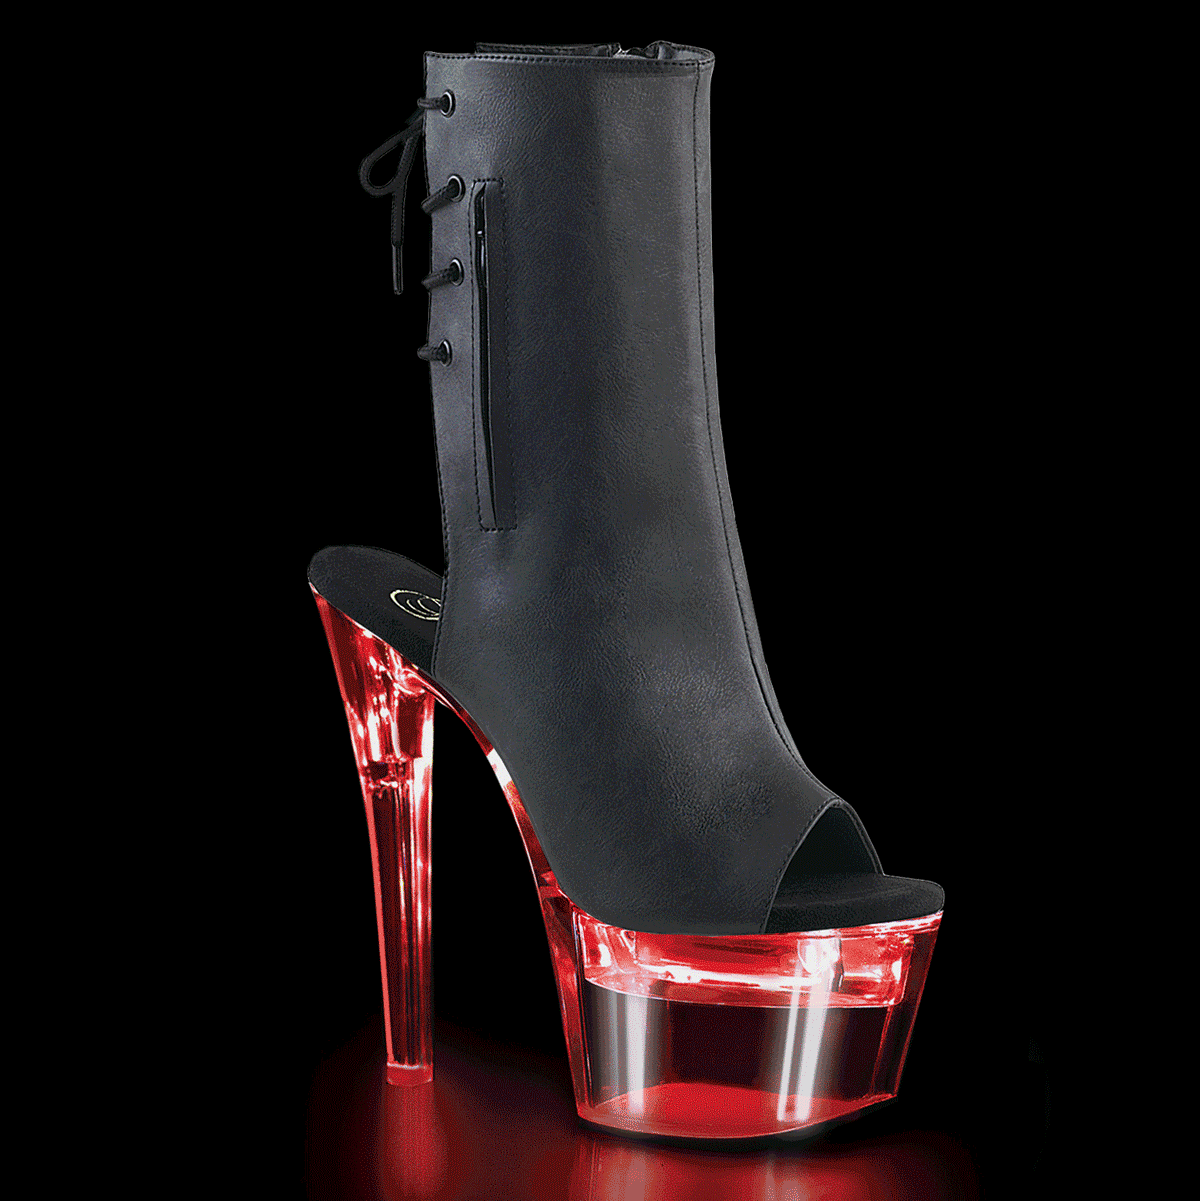 FLASHDANCE-1018-7 Strippers Heels Pleaser Platforms (Exotic Dancing) Blk Faux Leather/Clr